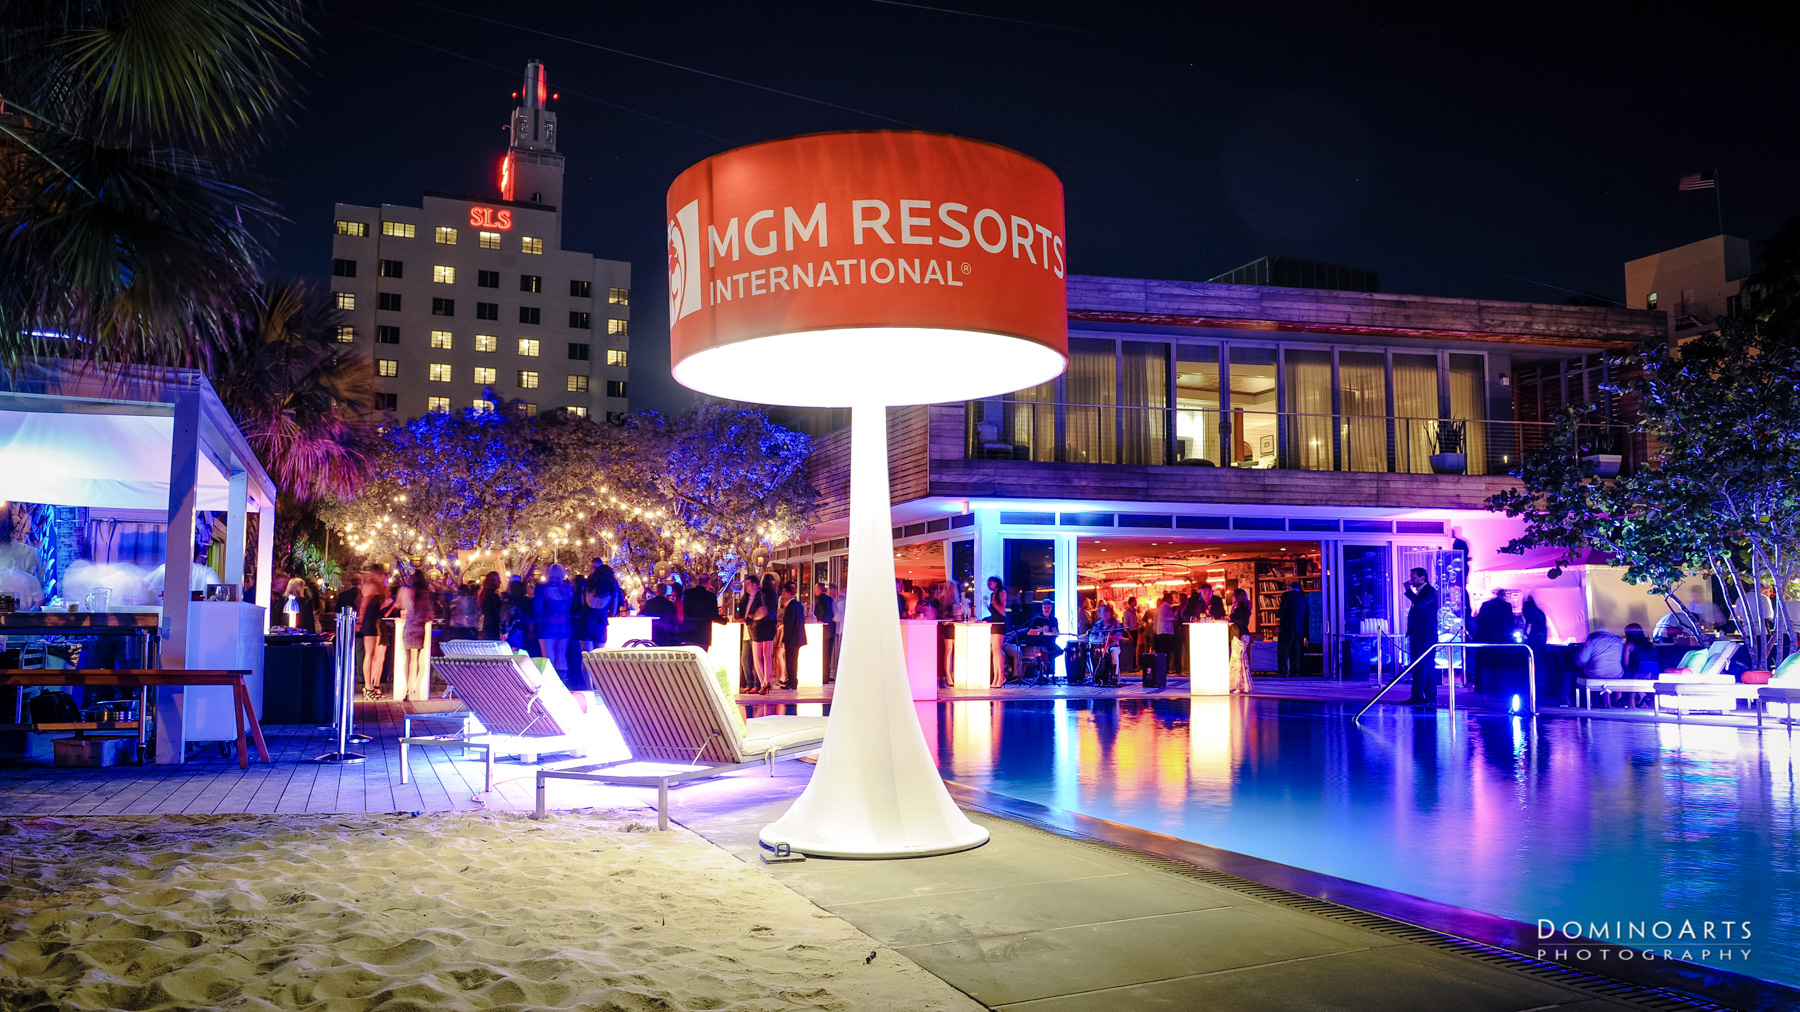 Corporate Event Photography of MGM Resorts International at SLS South Beach, Miami